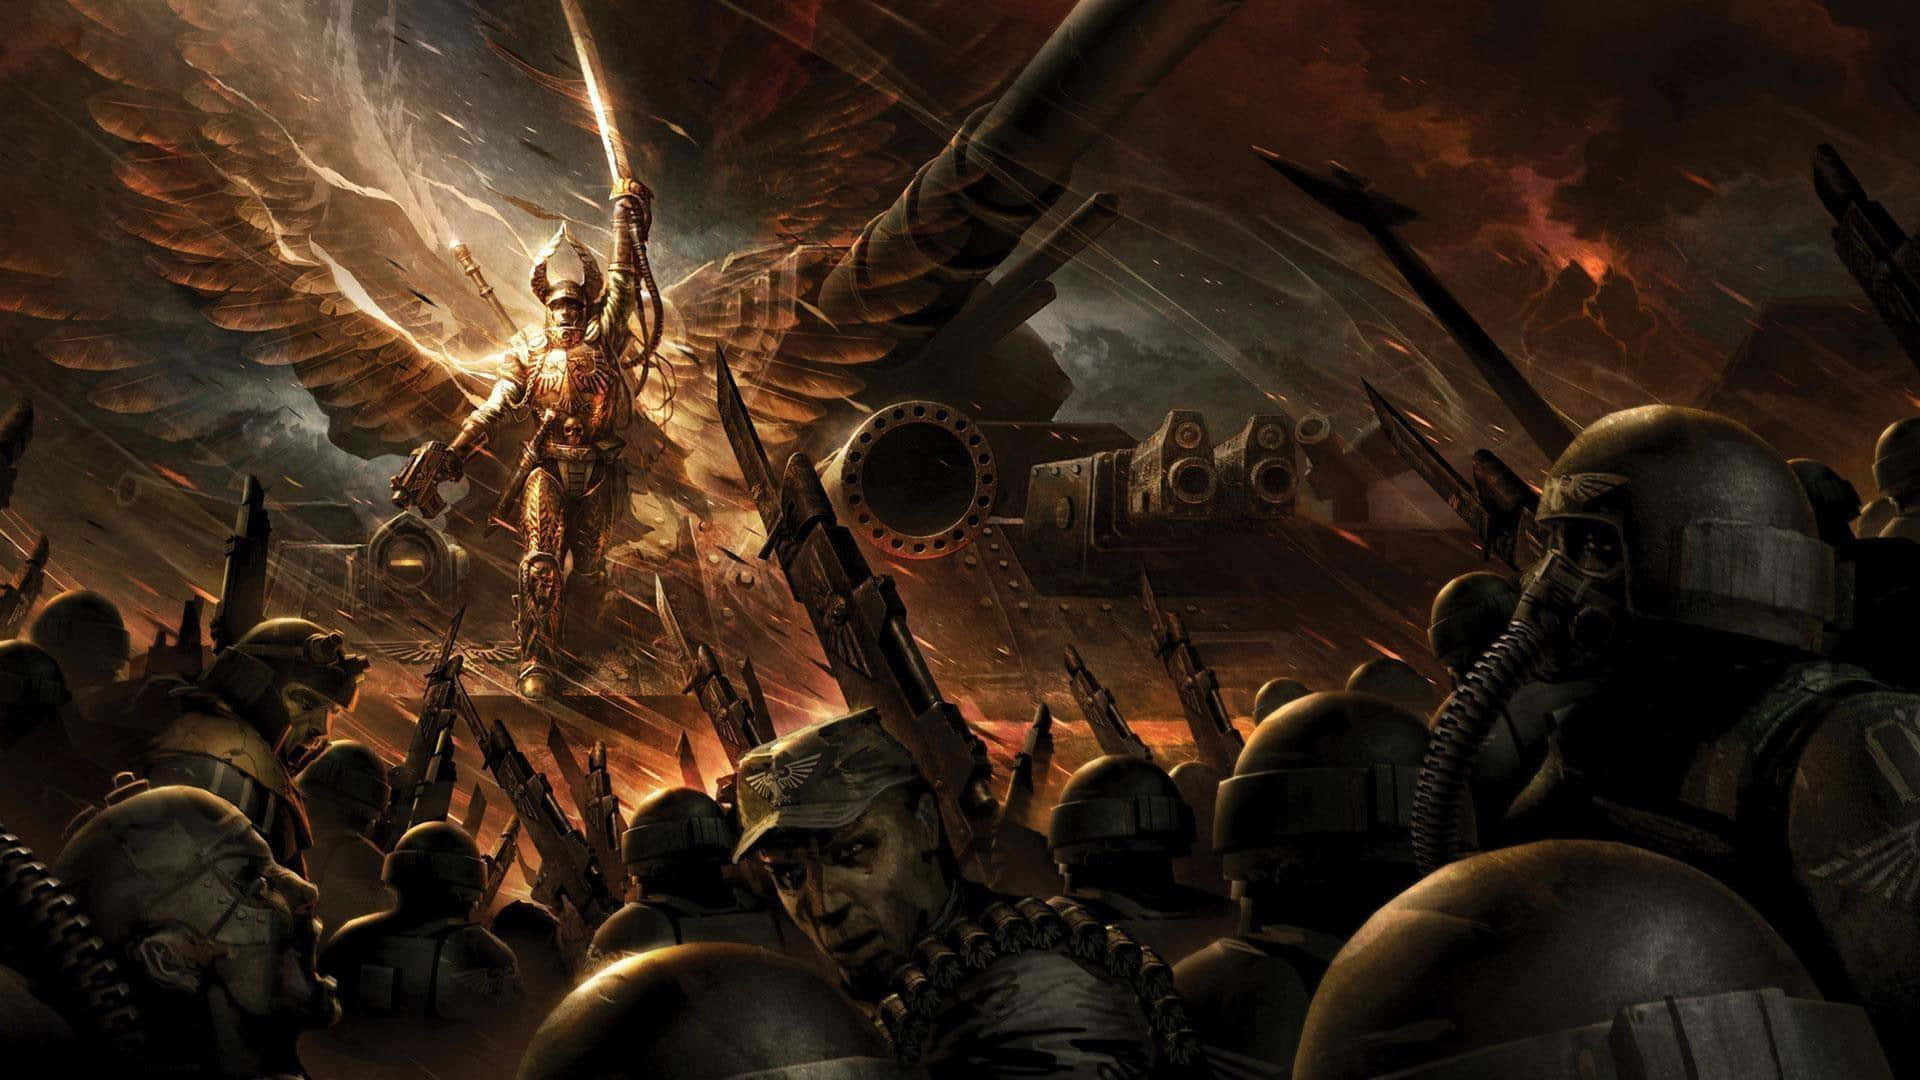 Armored Confrontation: Two forces clash in a Warhammer 4k battle Wallpaper